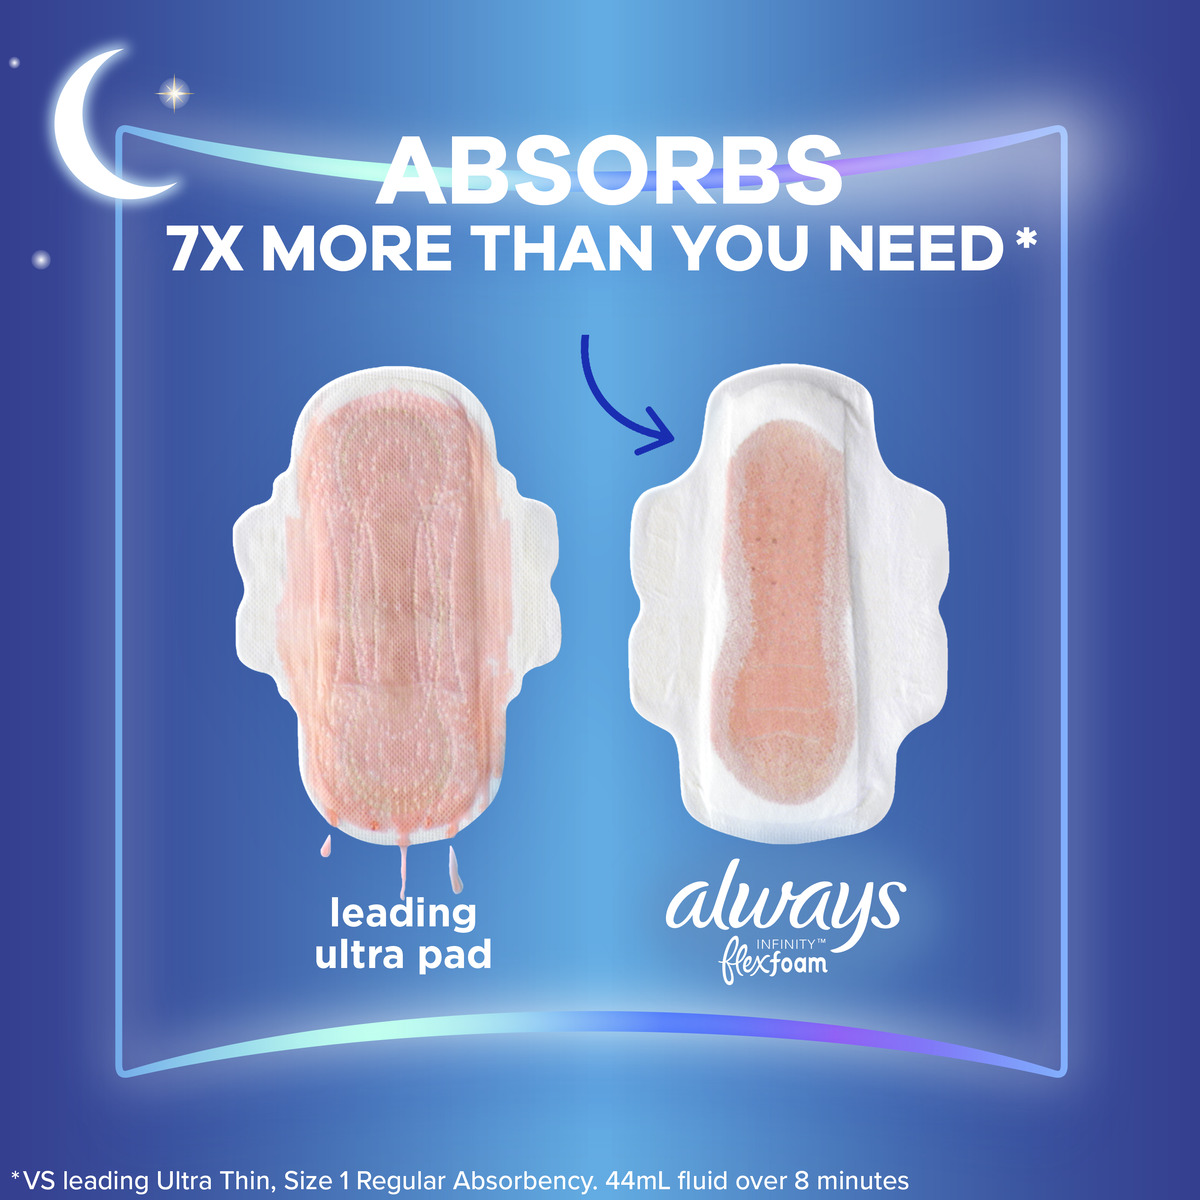 Absorbs 7x more than you need overnight pads